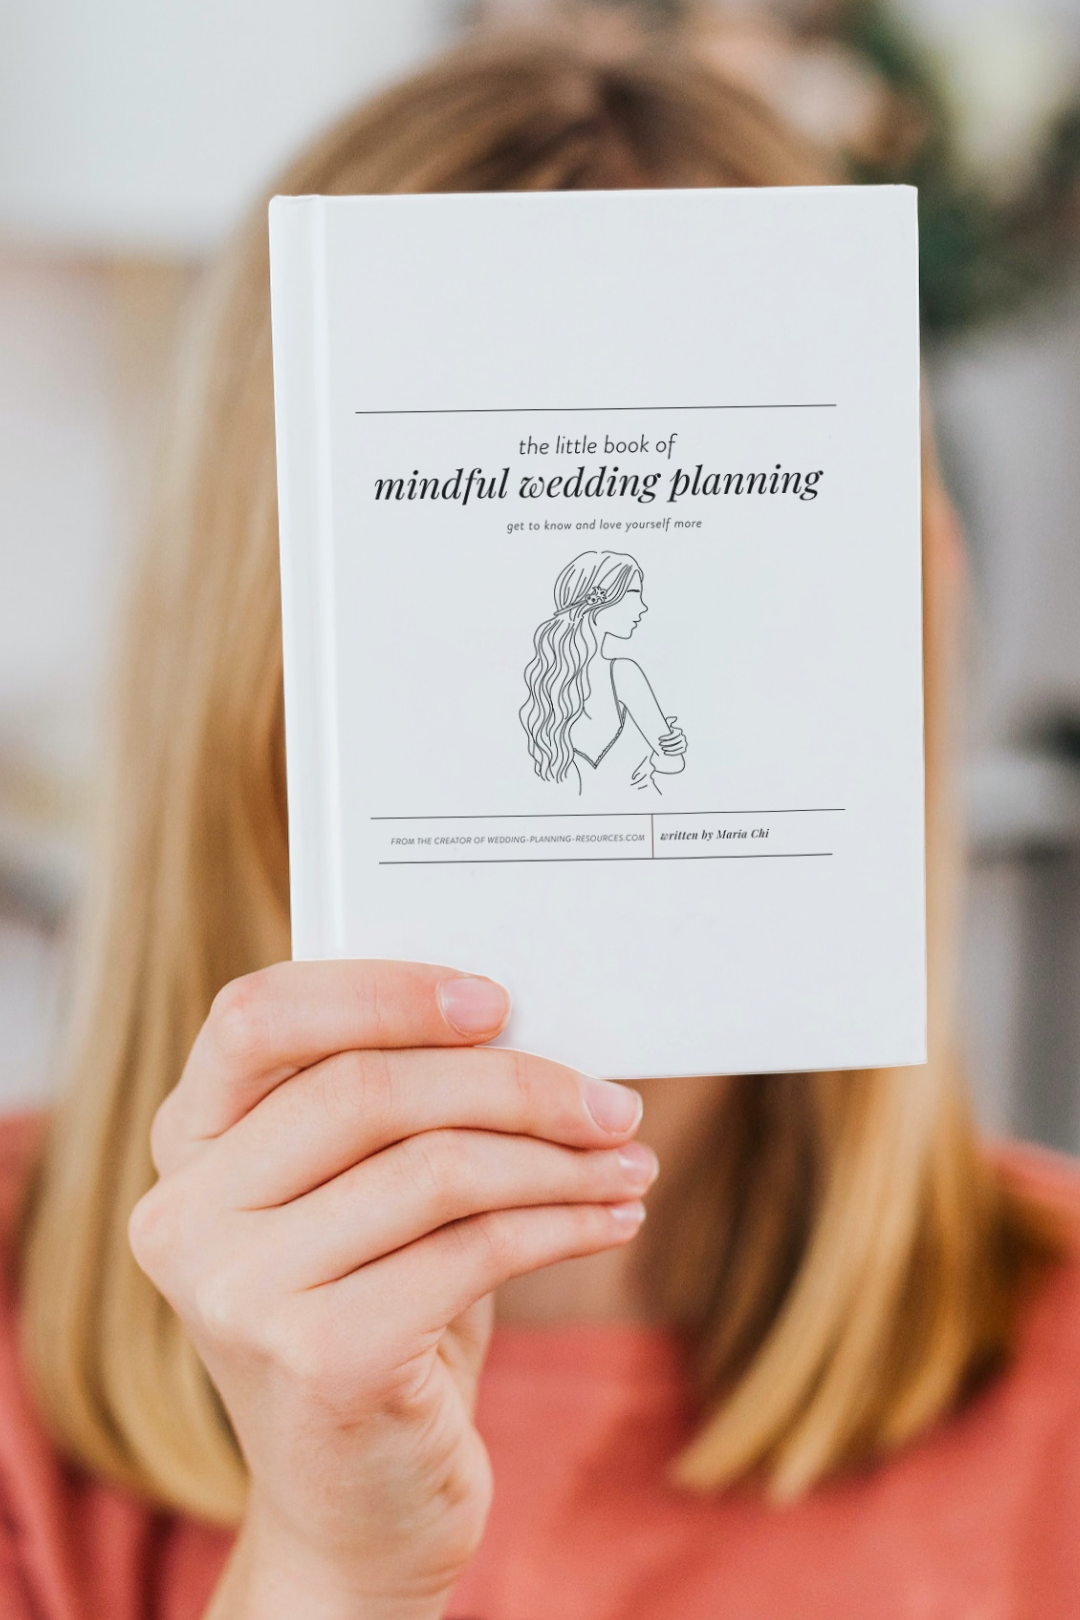 Mindful Wedding Planning: What's That?